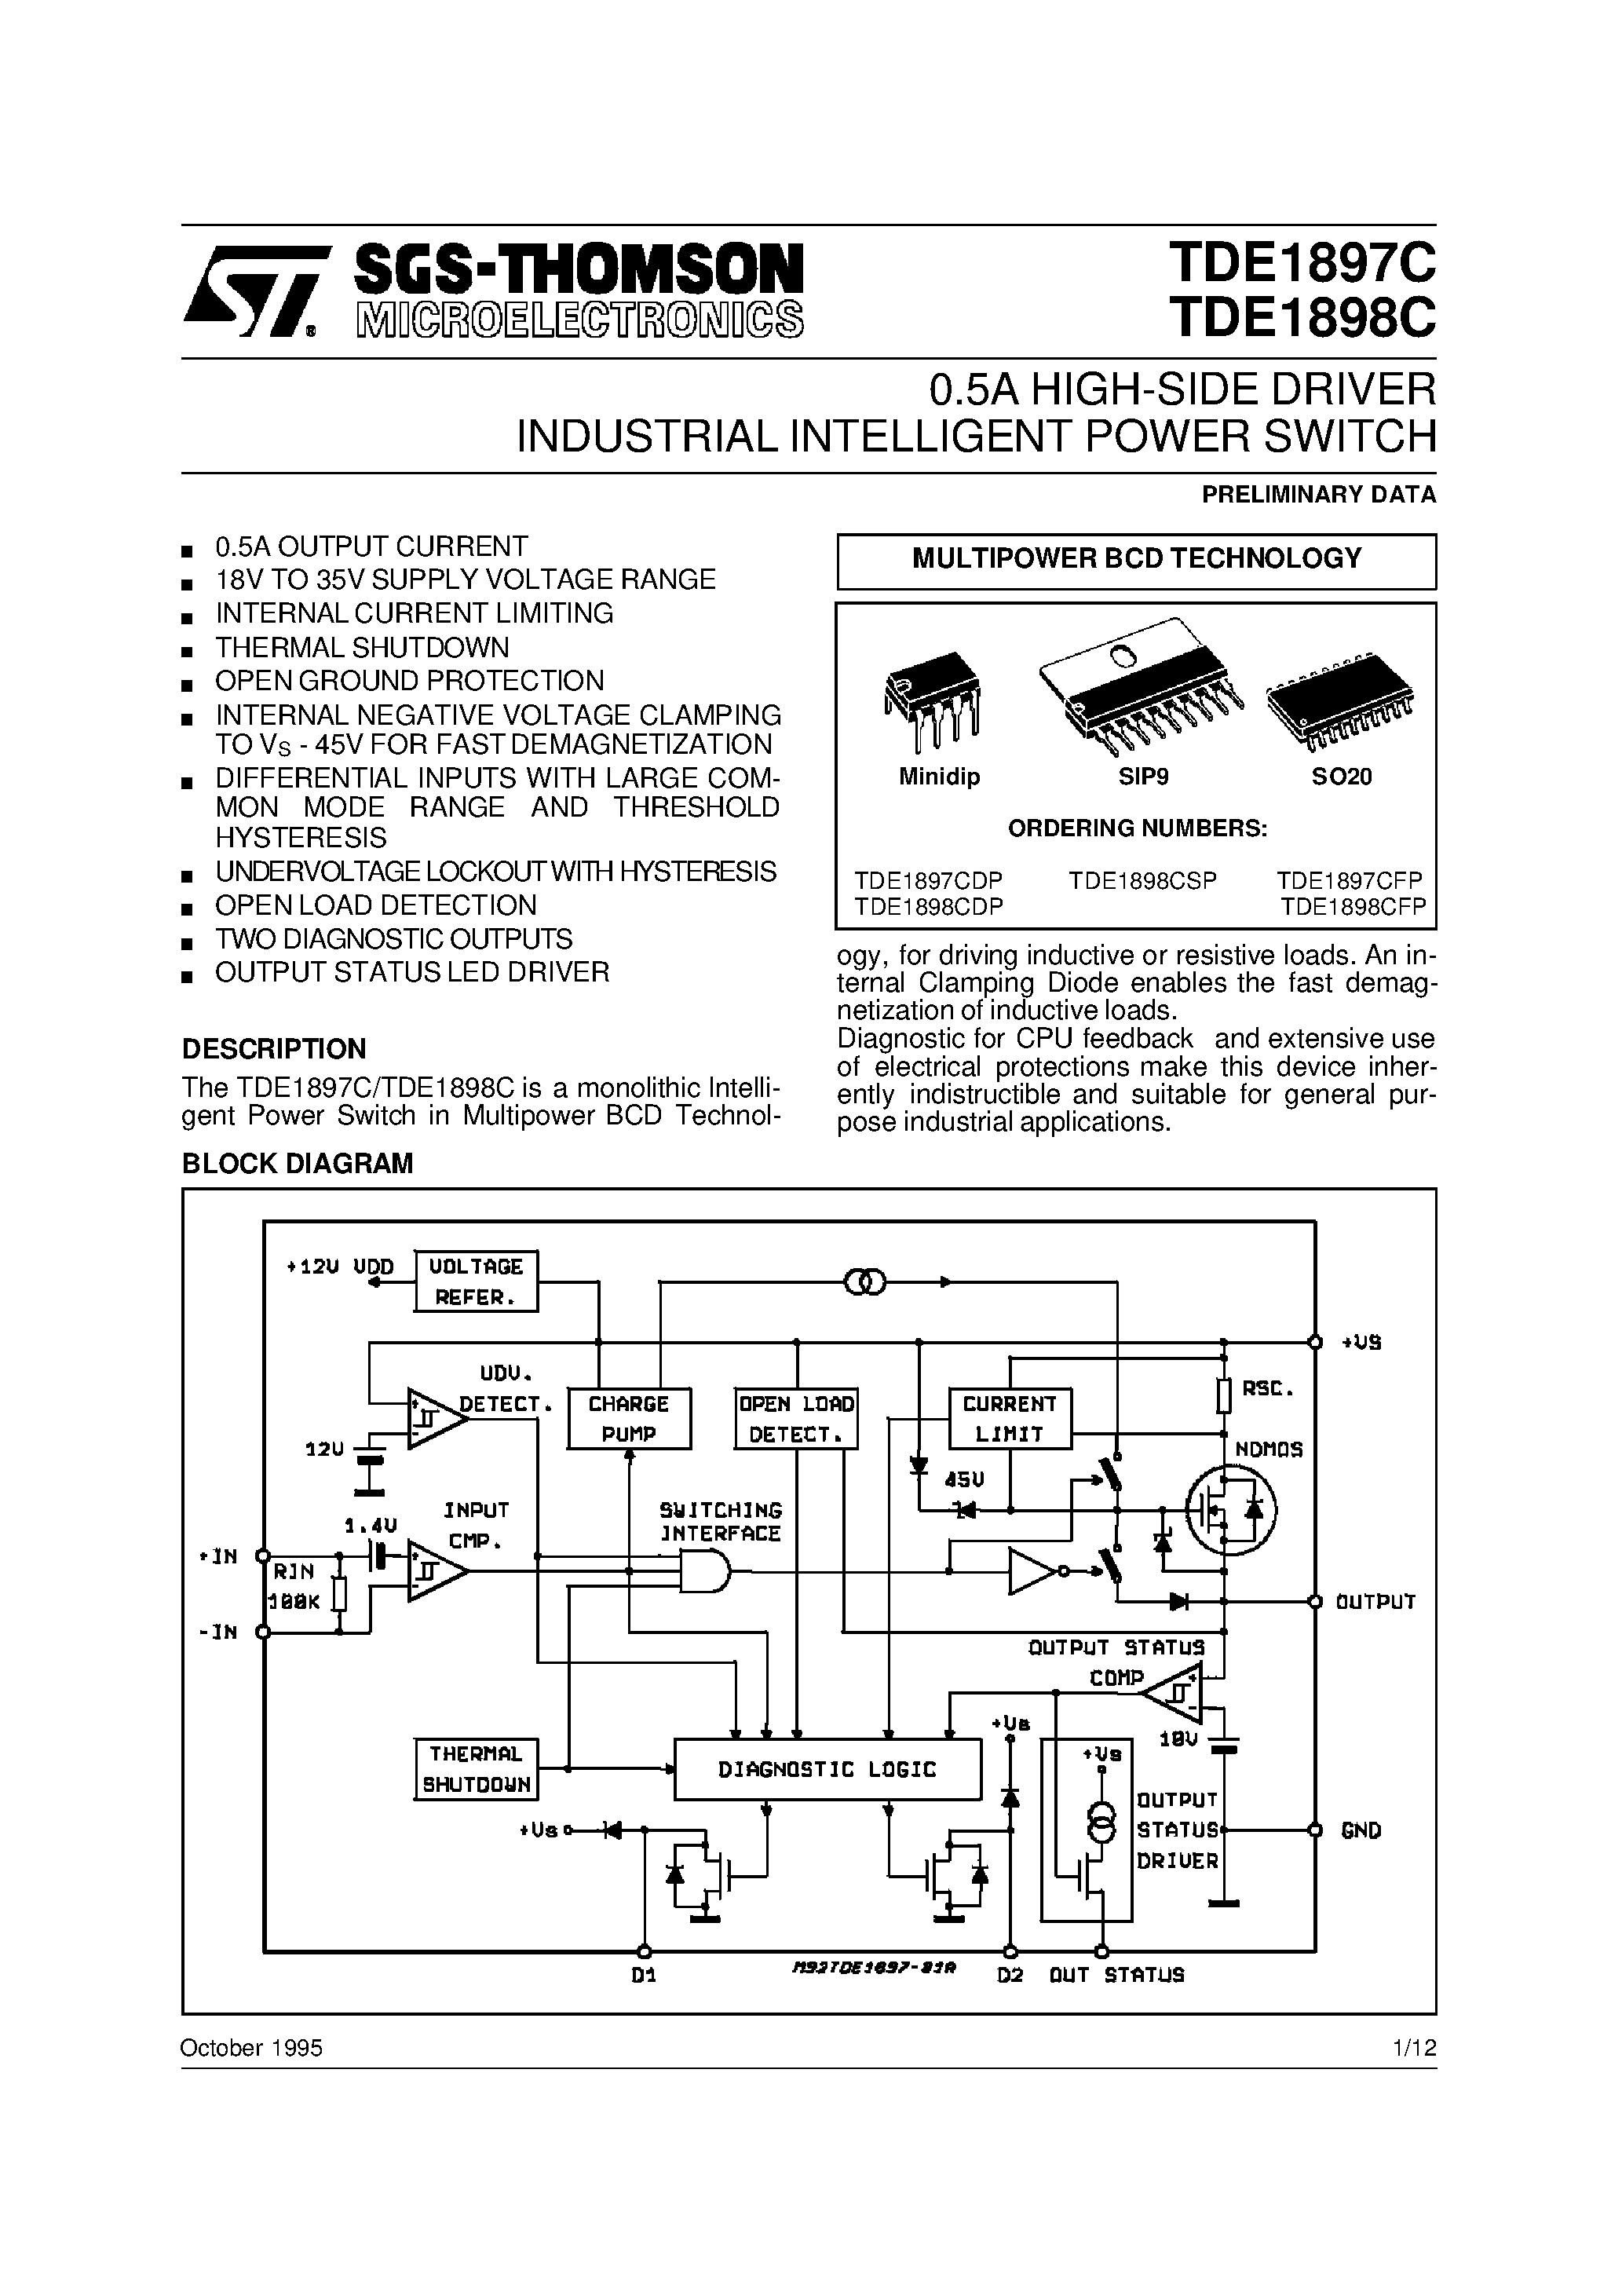 Datasheet TDE1897CFP - 0.5A HIGH-SIDE DRIVER INDUSTRIAL INTELLIGENT POWER SWITCH page 1